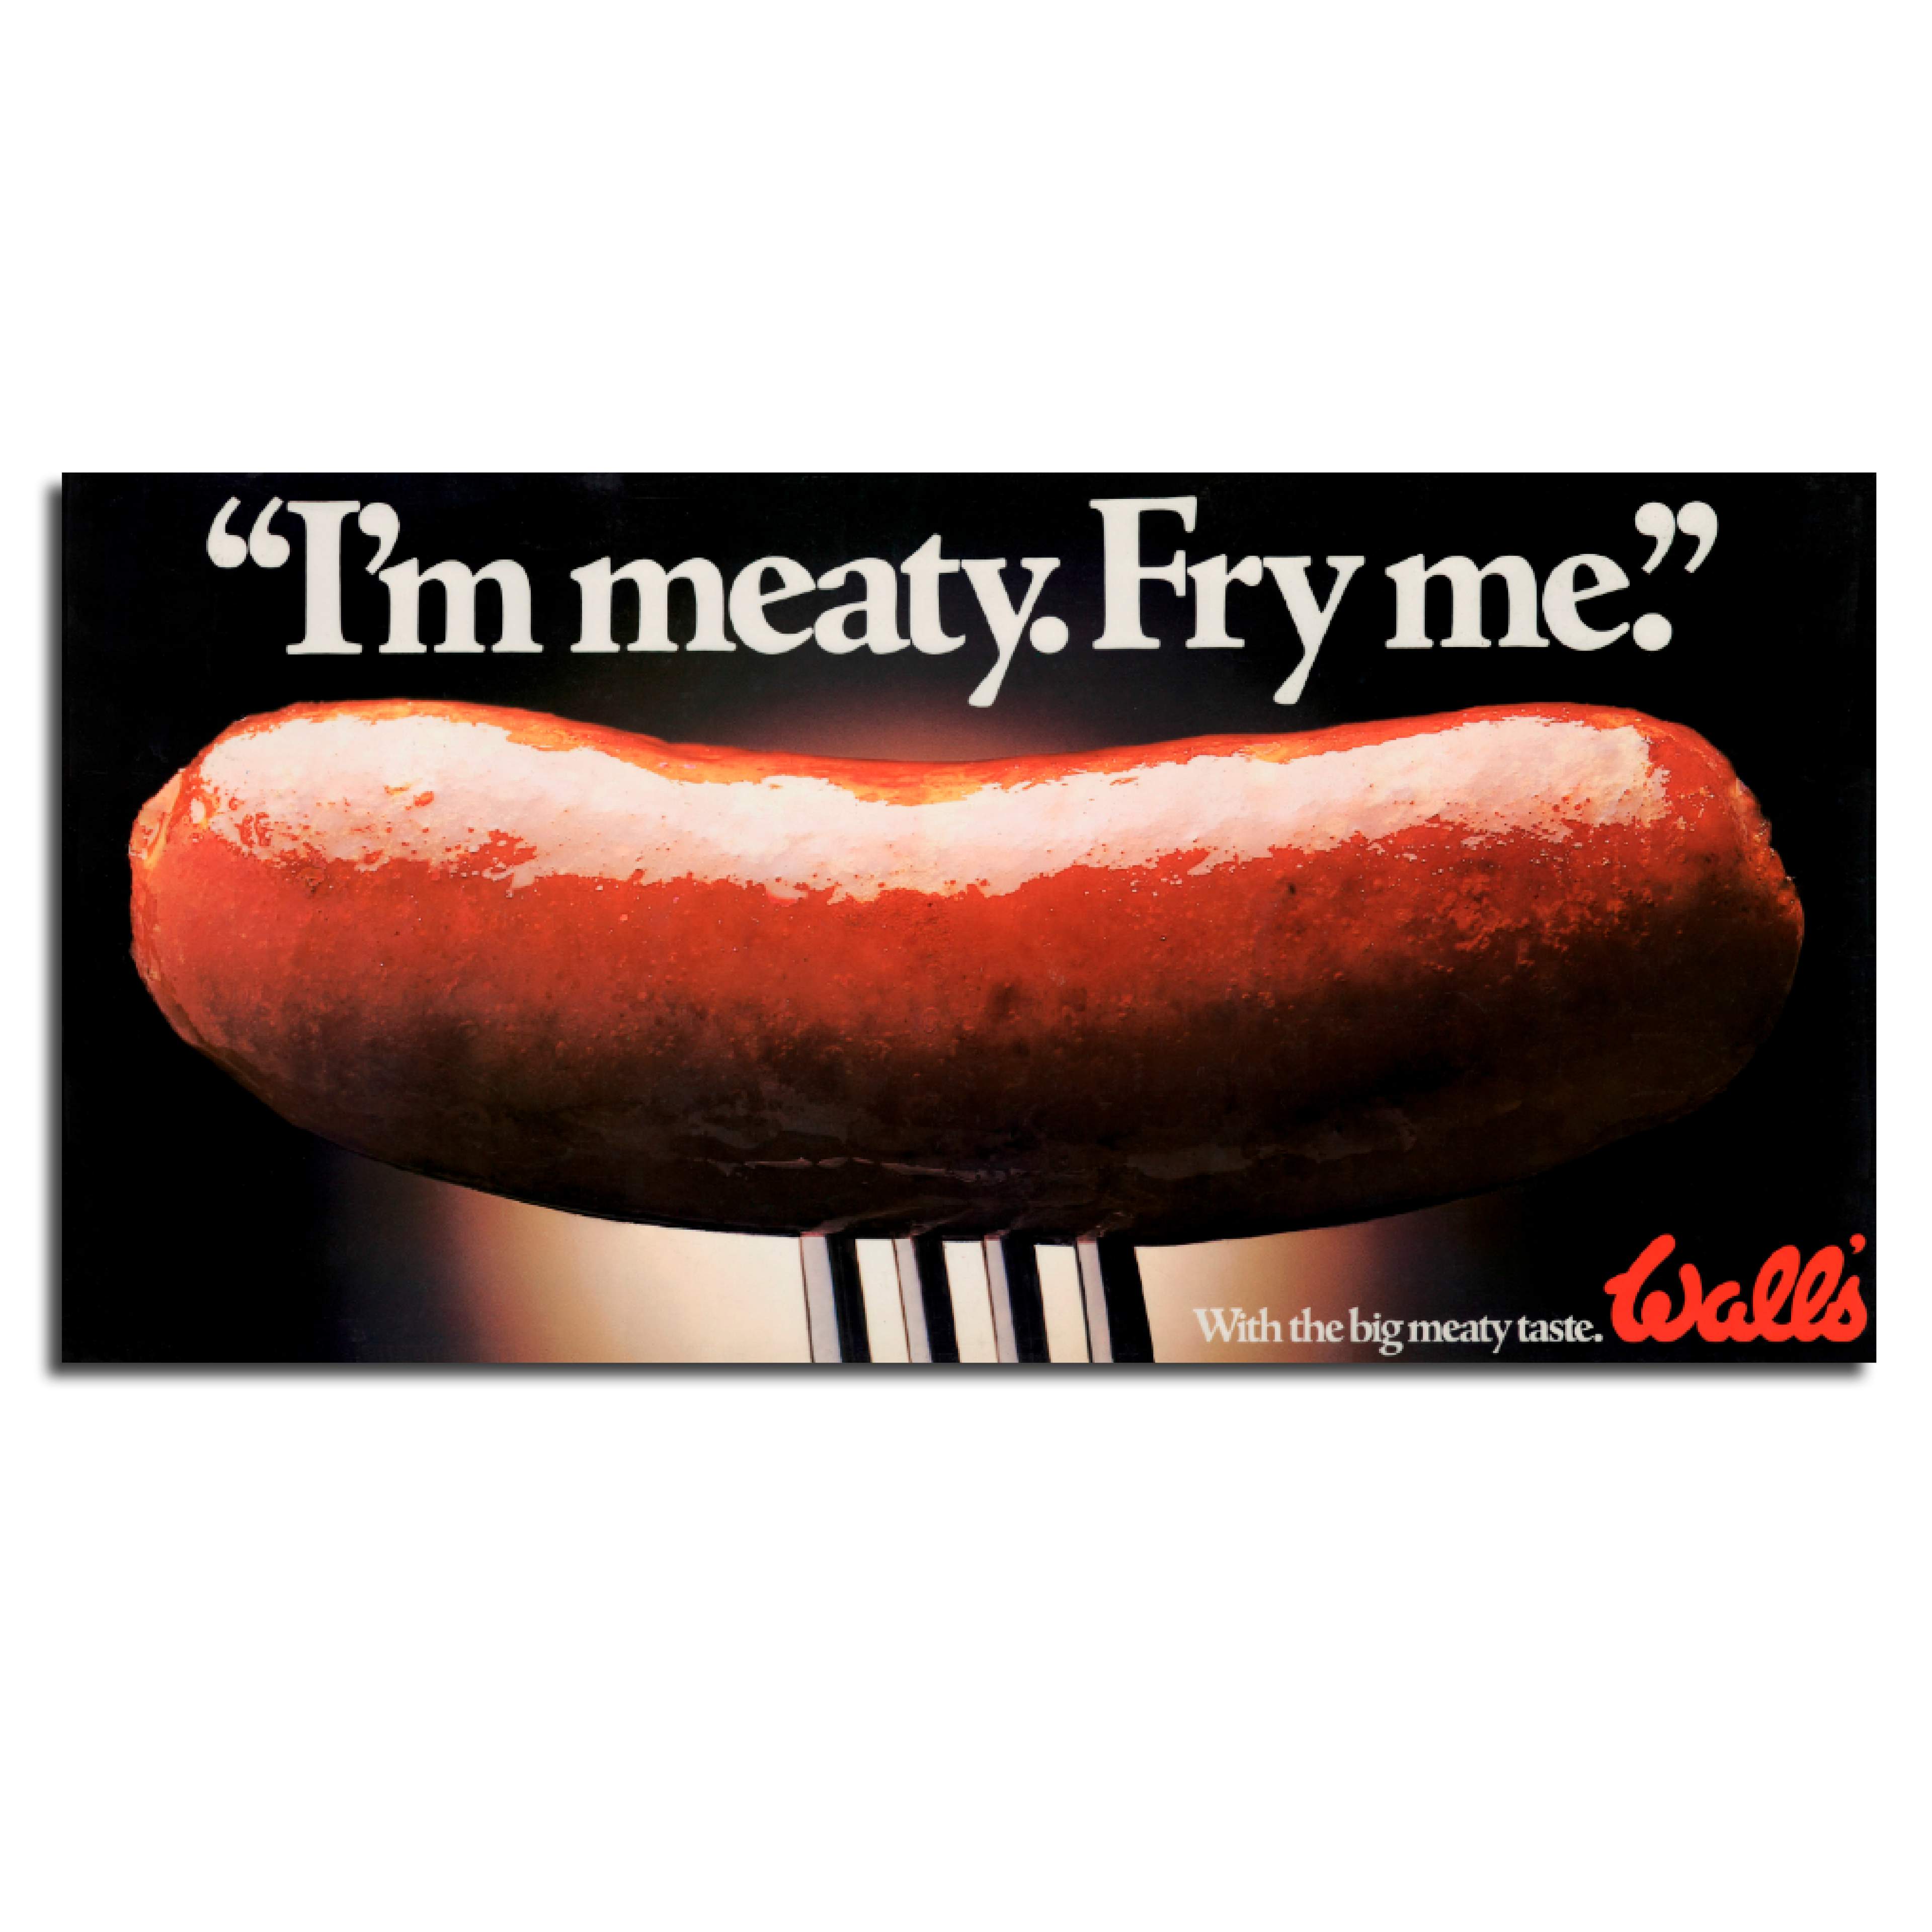 Close-up photo of a cooked sausage on a fork. Award-winning poster for Wall's sausages.